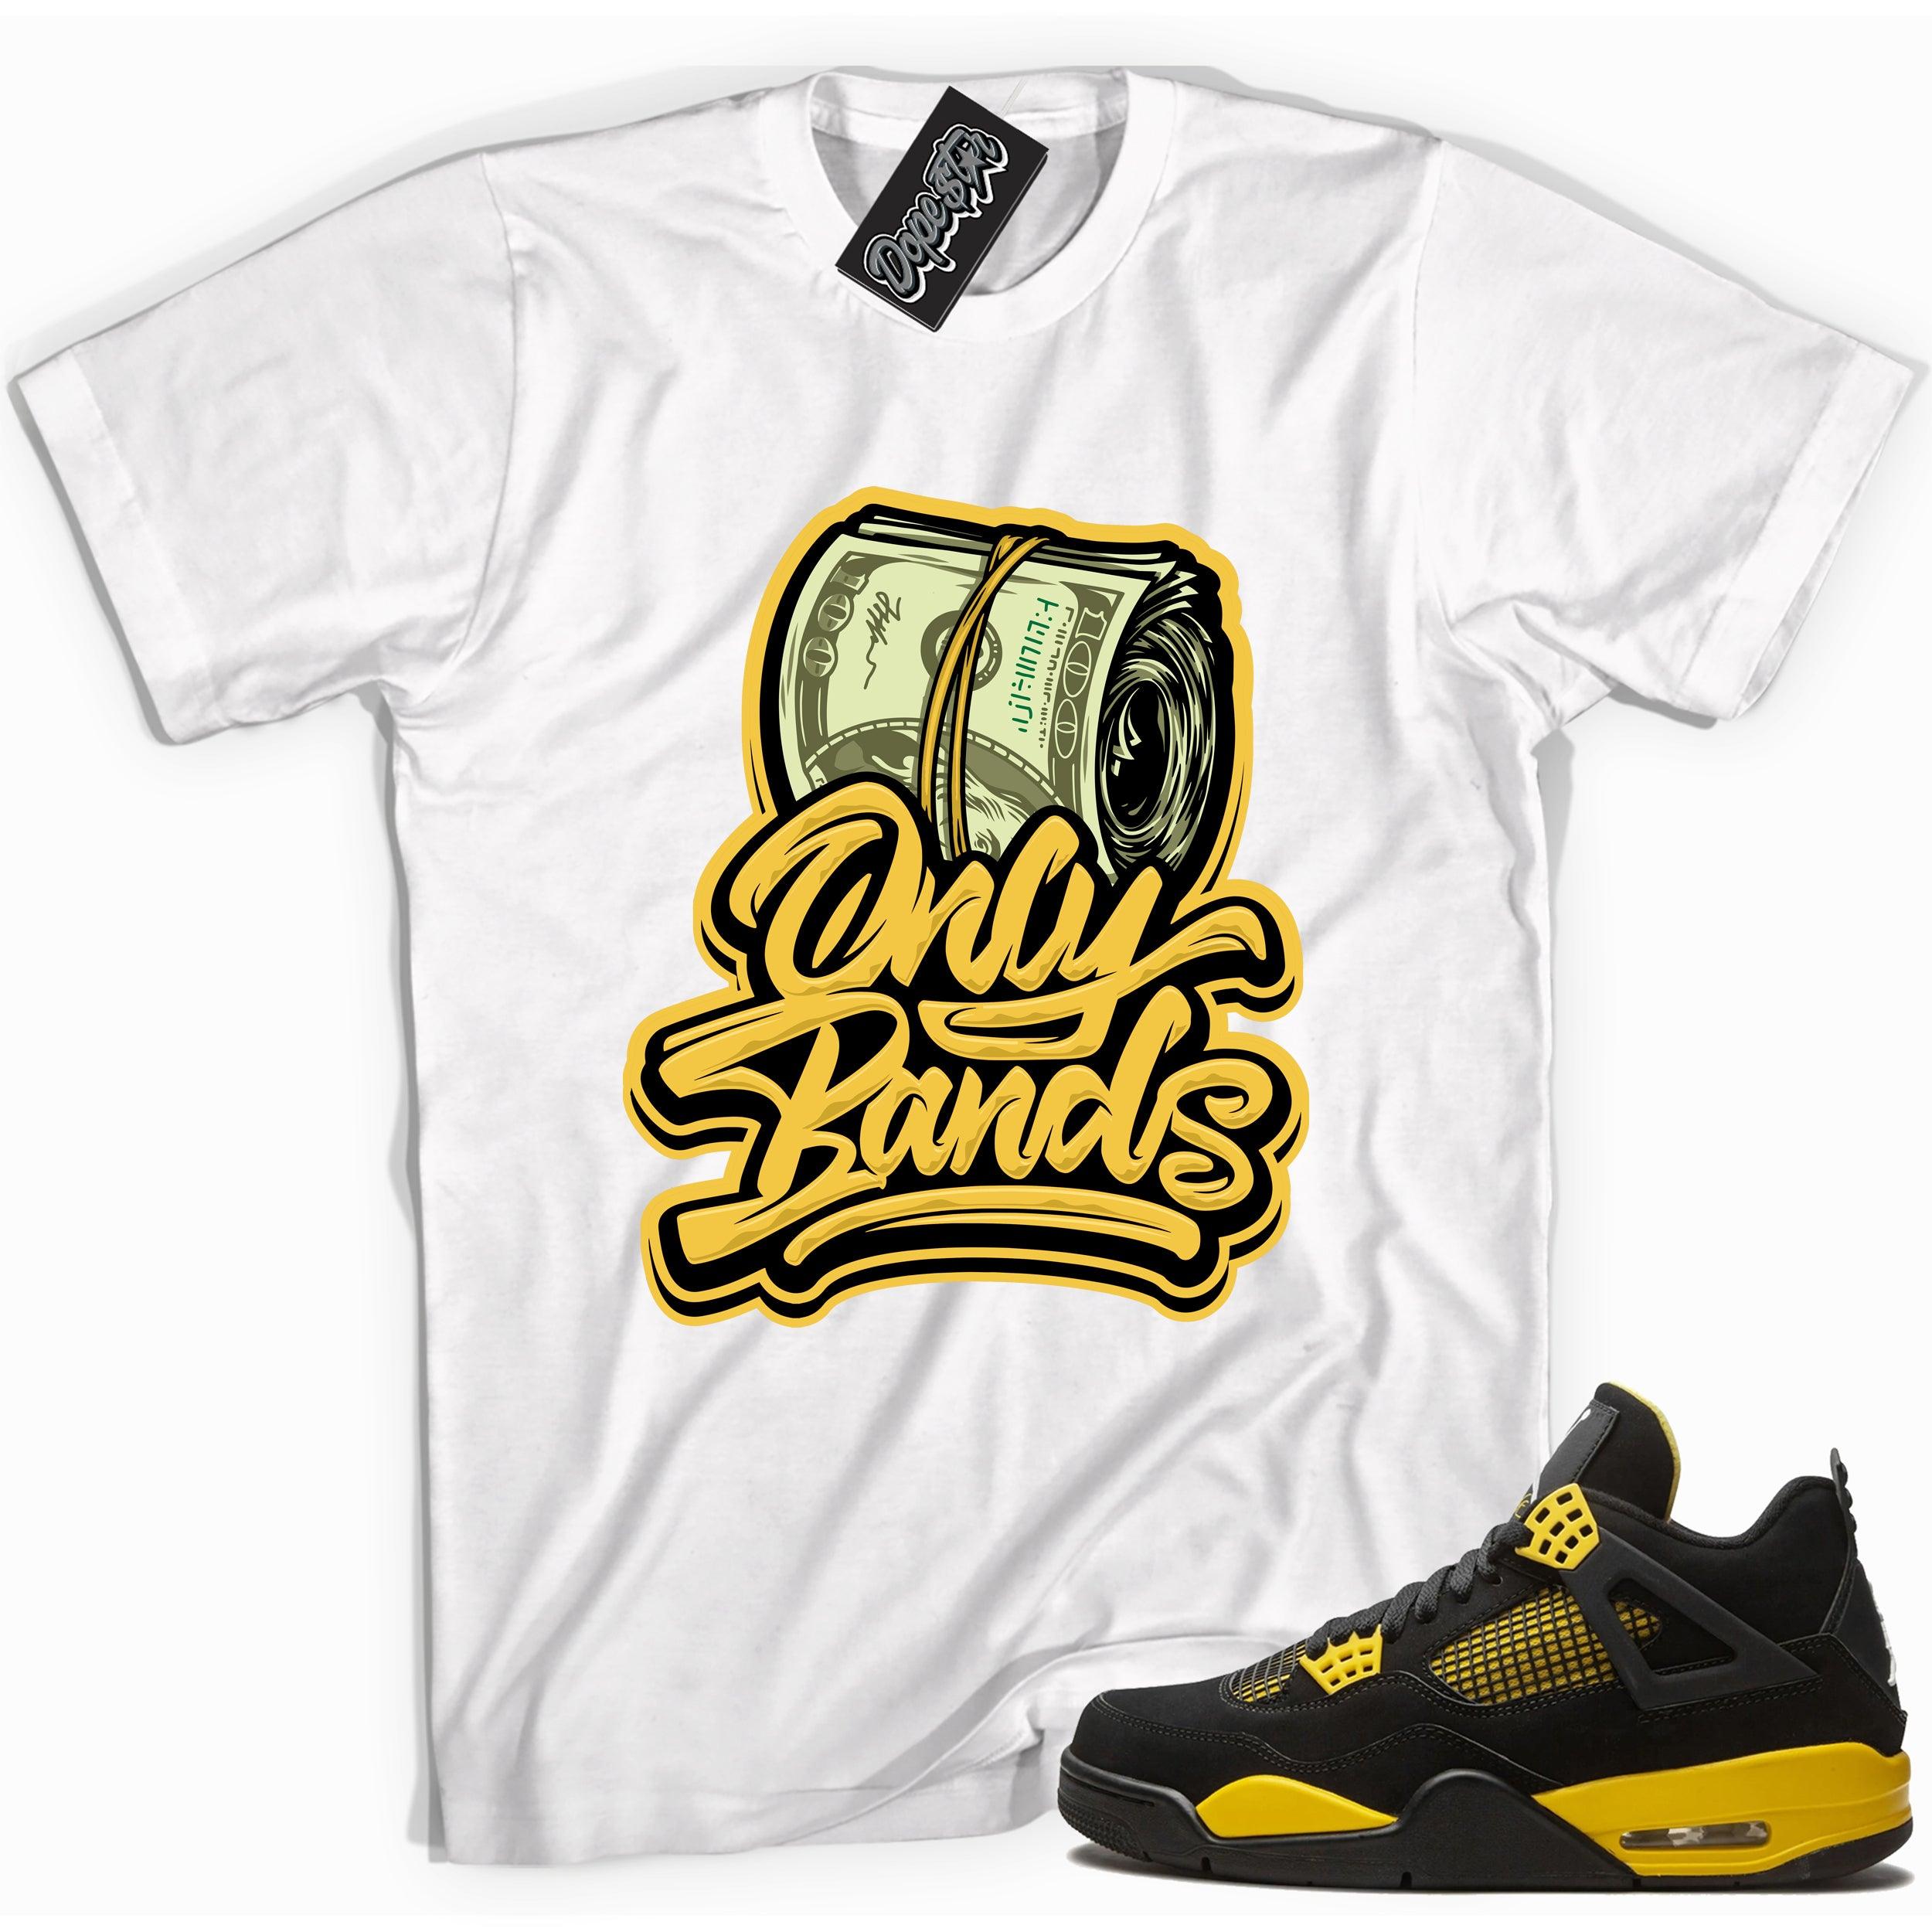 Cool white graphic tee with 'only bands' print, that perfectly matches Air Jordan 4 Thunder sneakers